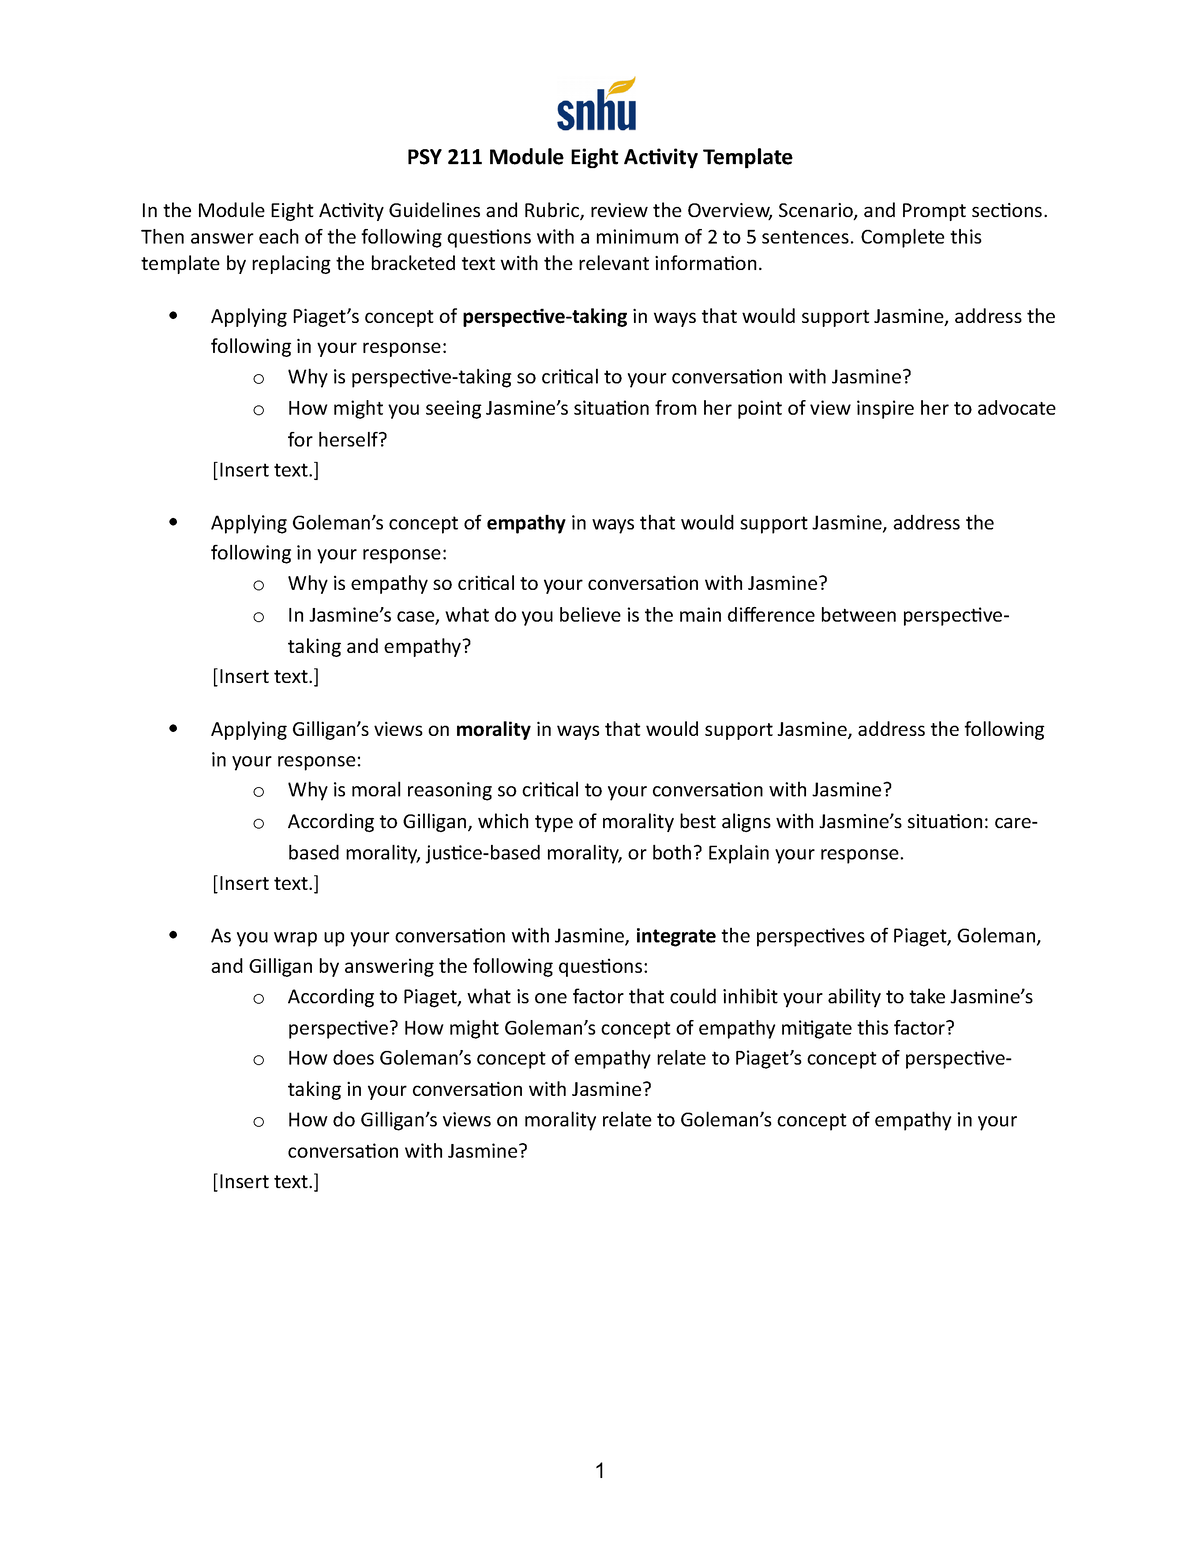 PSY 211 Module Eight Activity Template - Then answer each of the ...